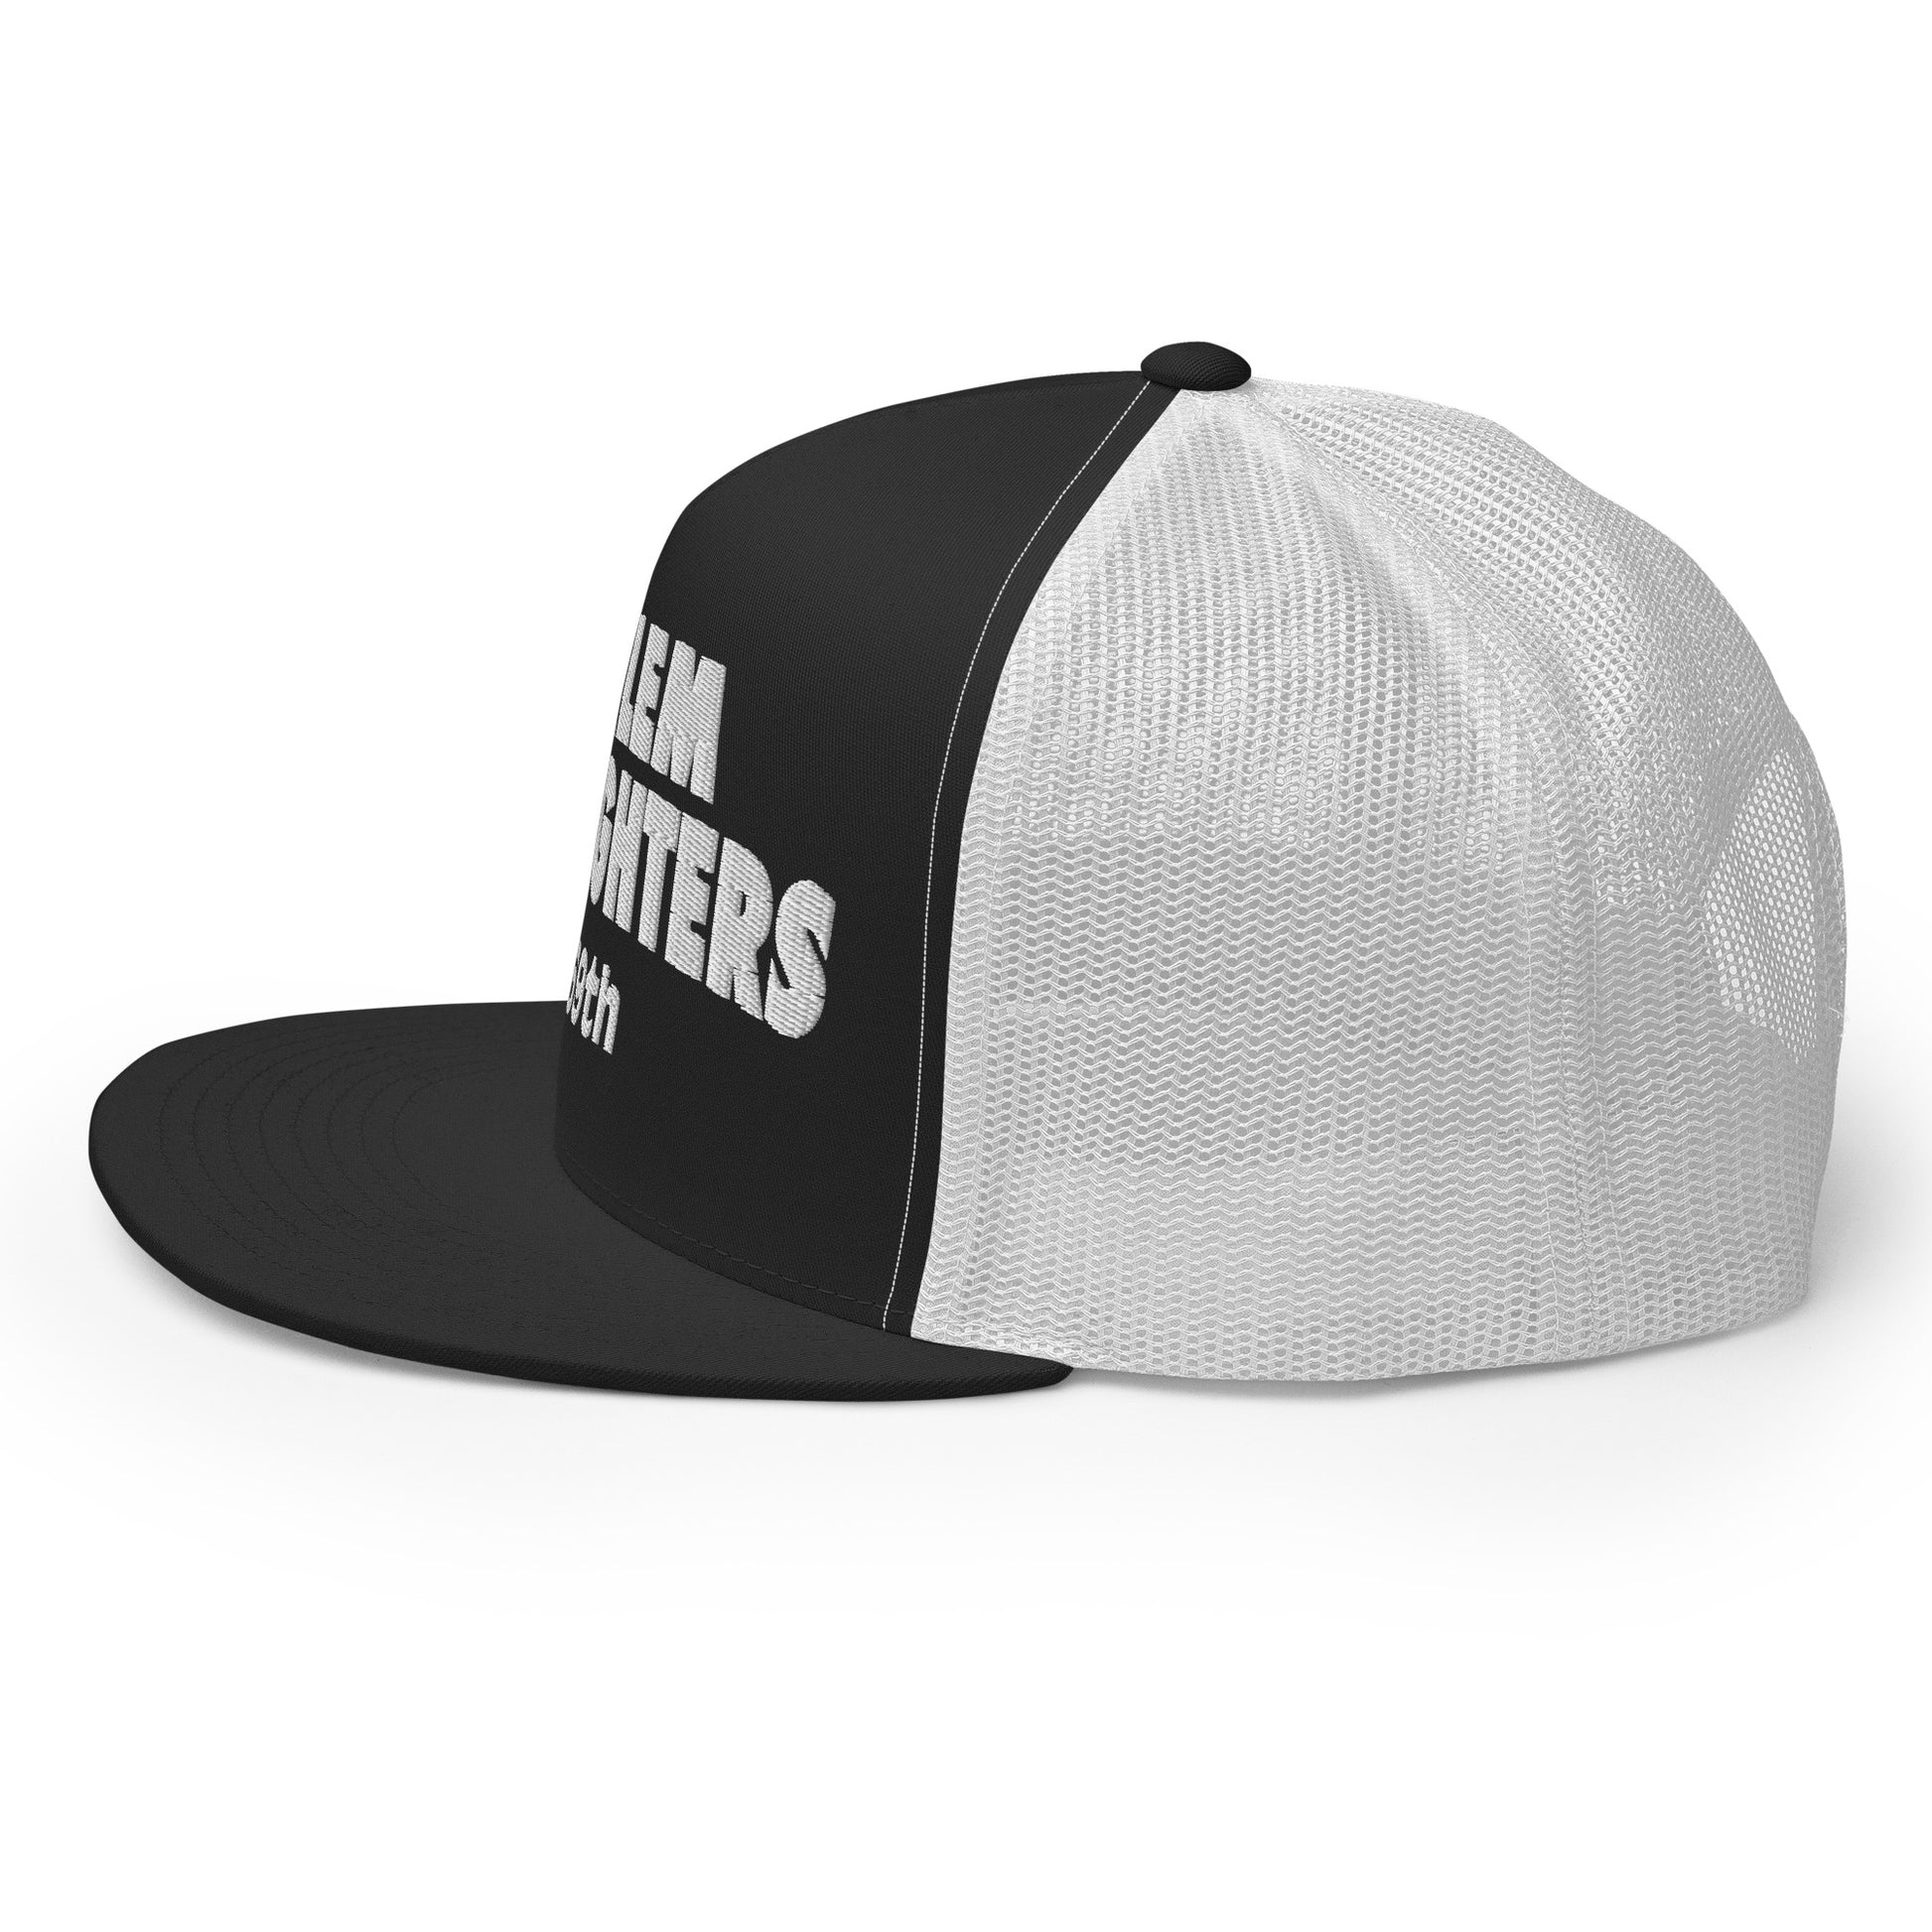 black and white trucker hat with harlem hellfighters 369th embroidery